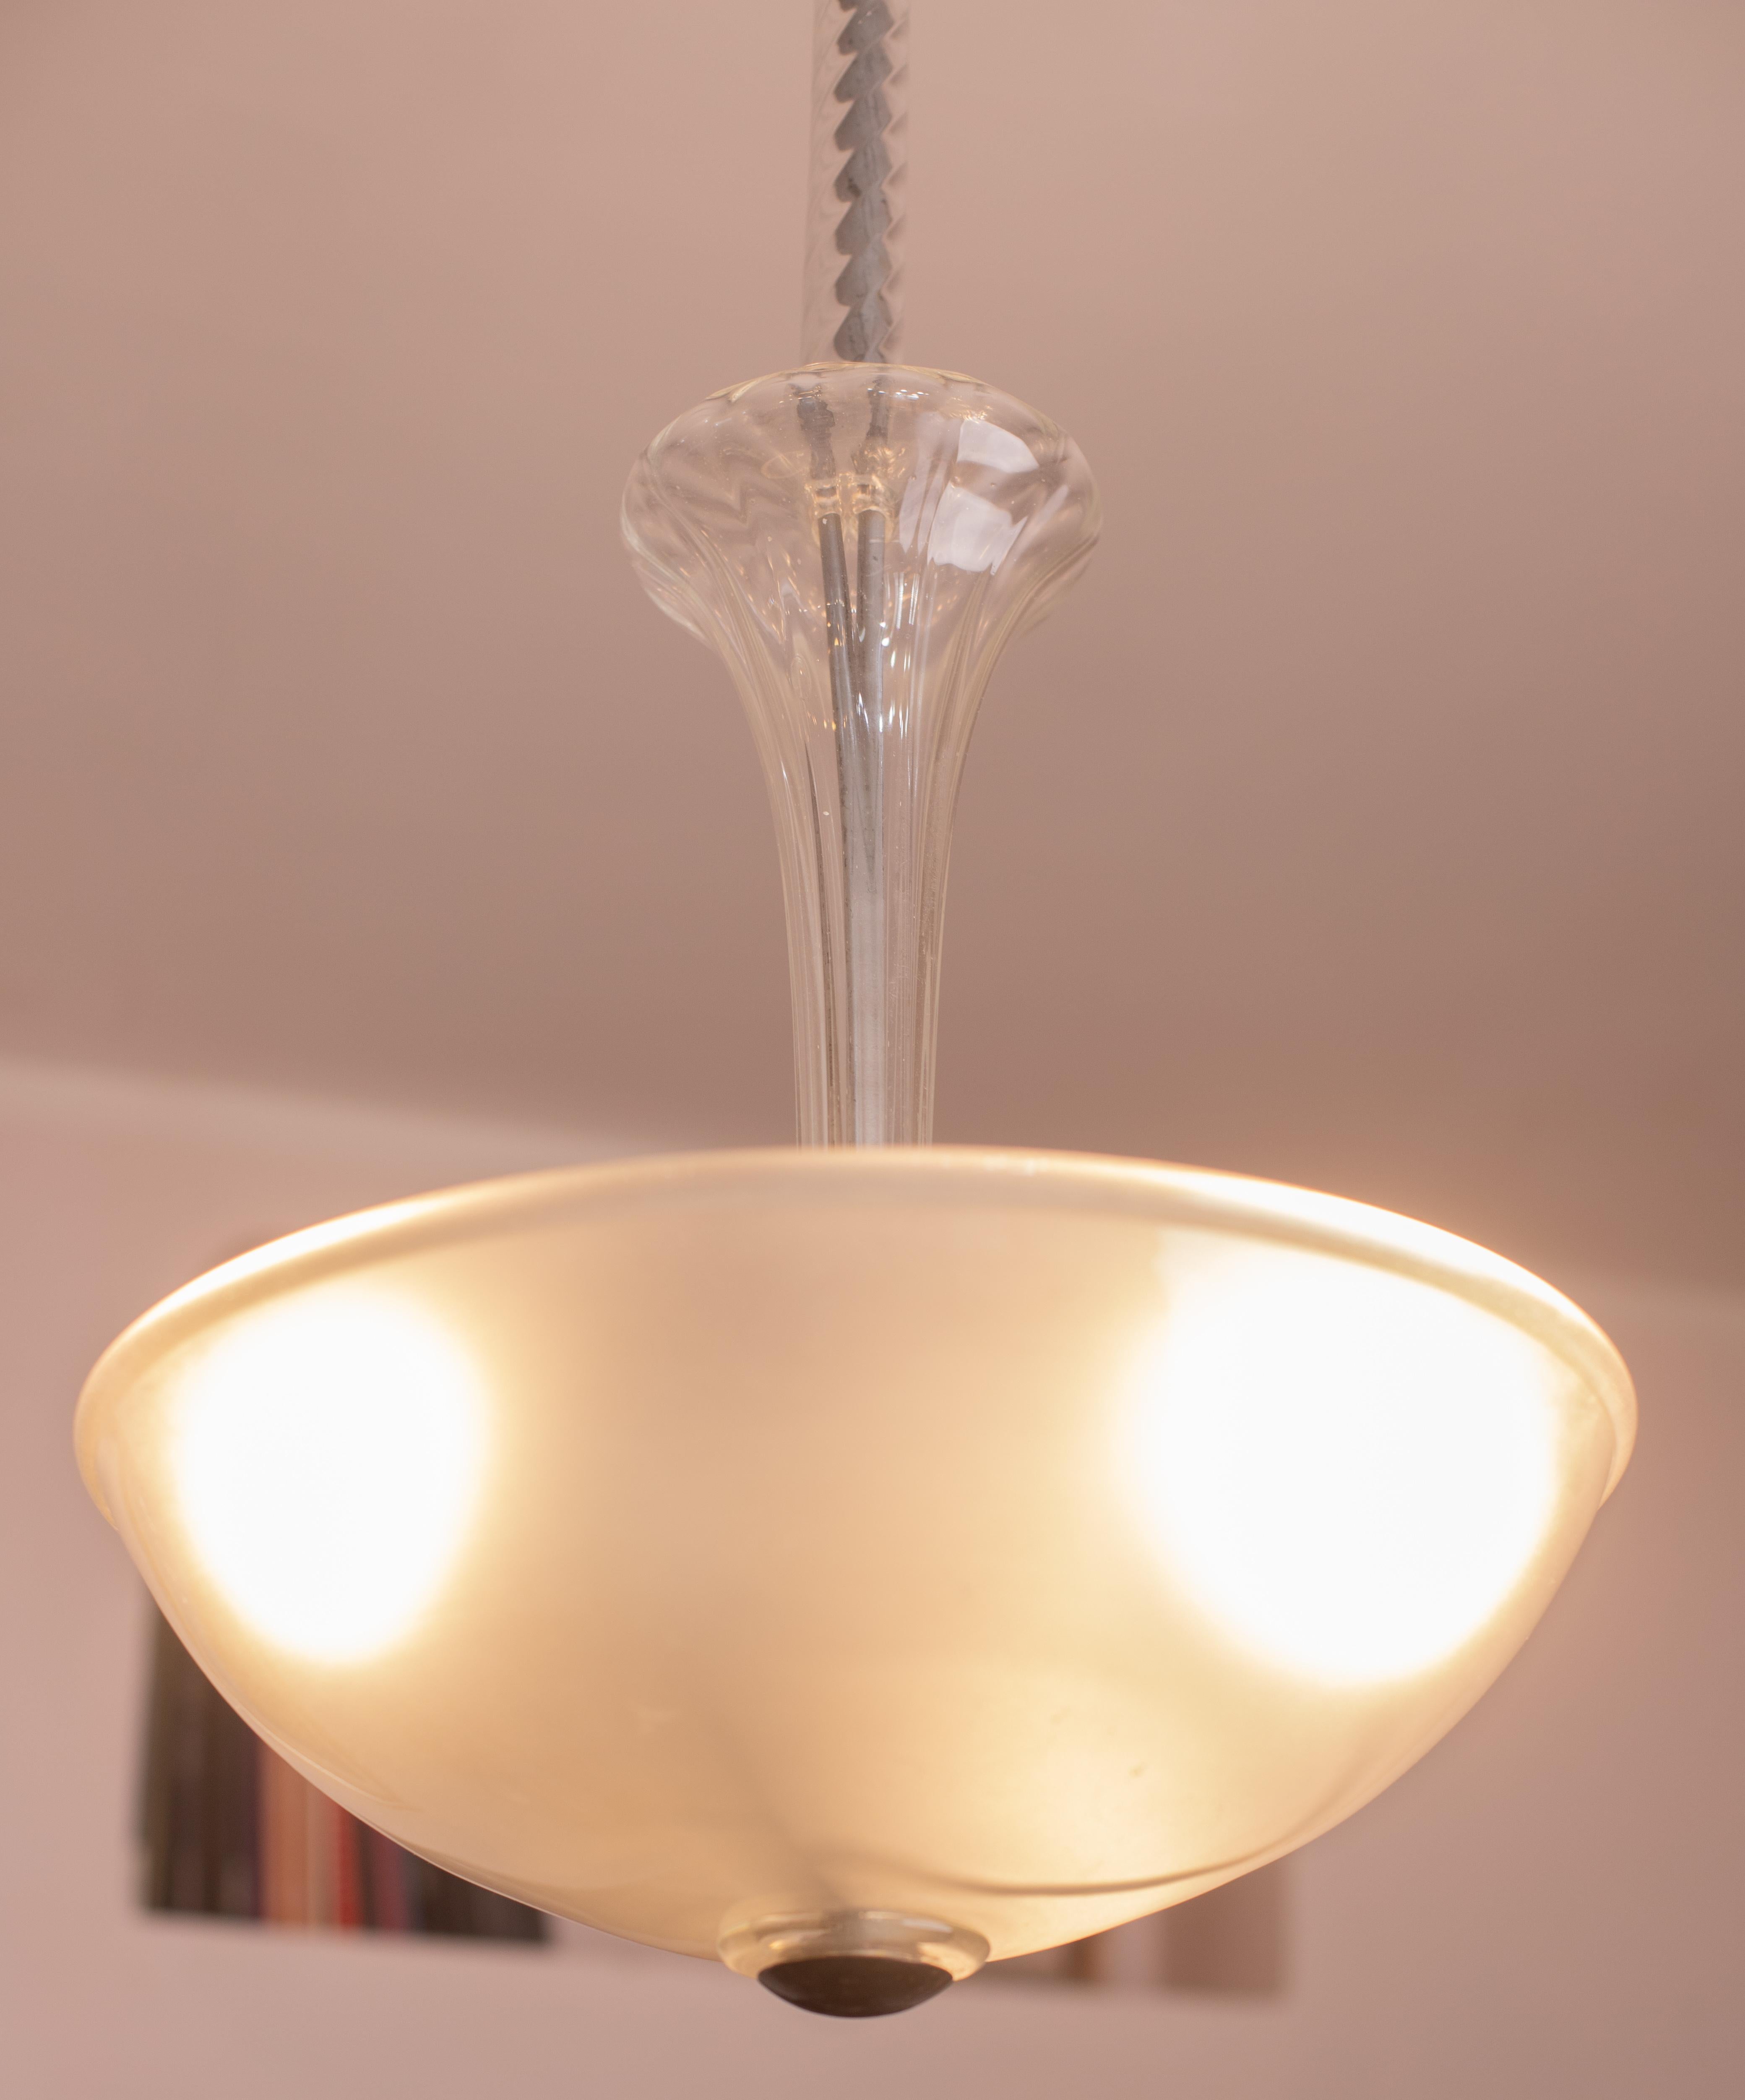 Art Glass Elegant Barovier and Toso Chandelier, 1960s For Sale